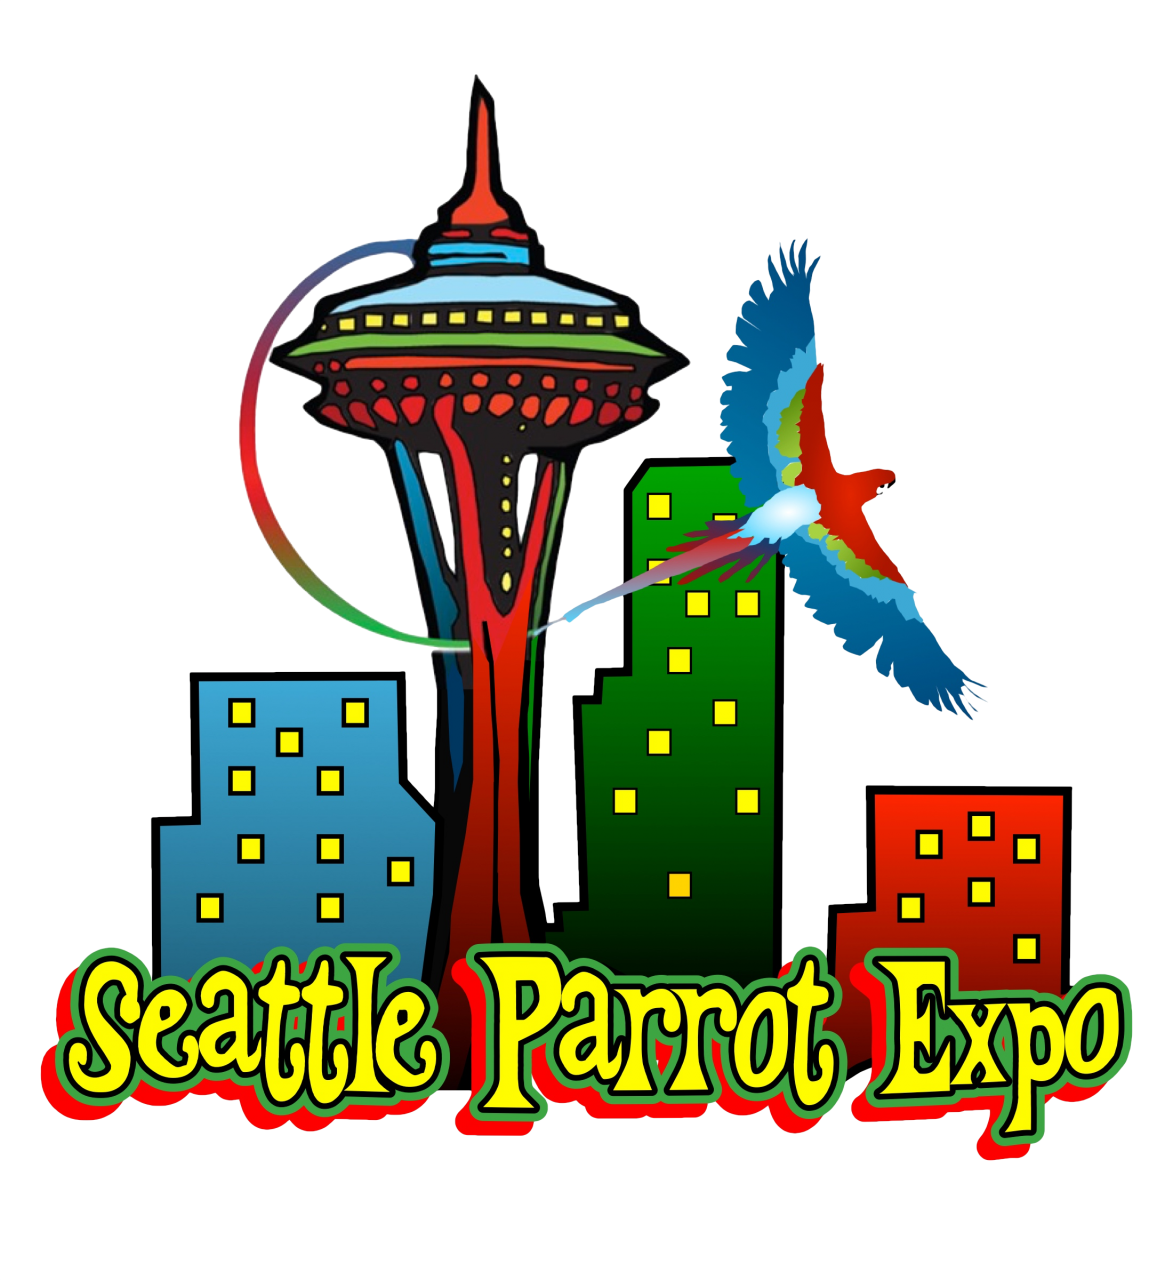 Seattle Parrot Expo (1173x1280)